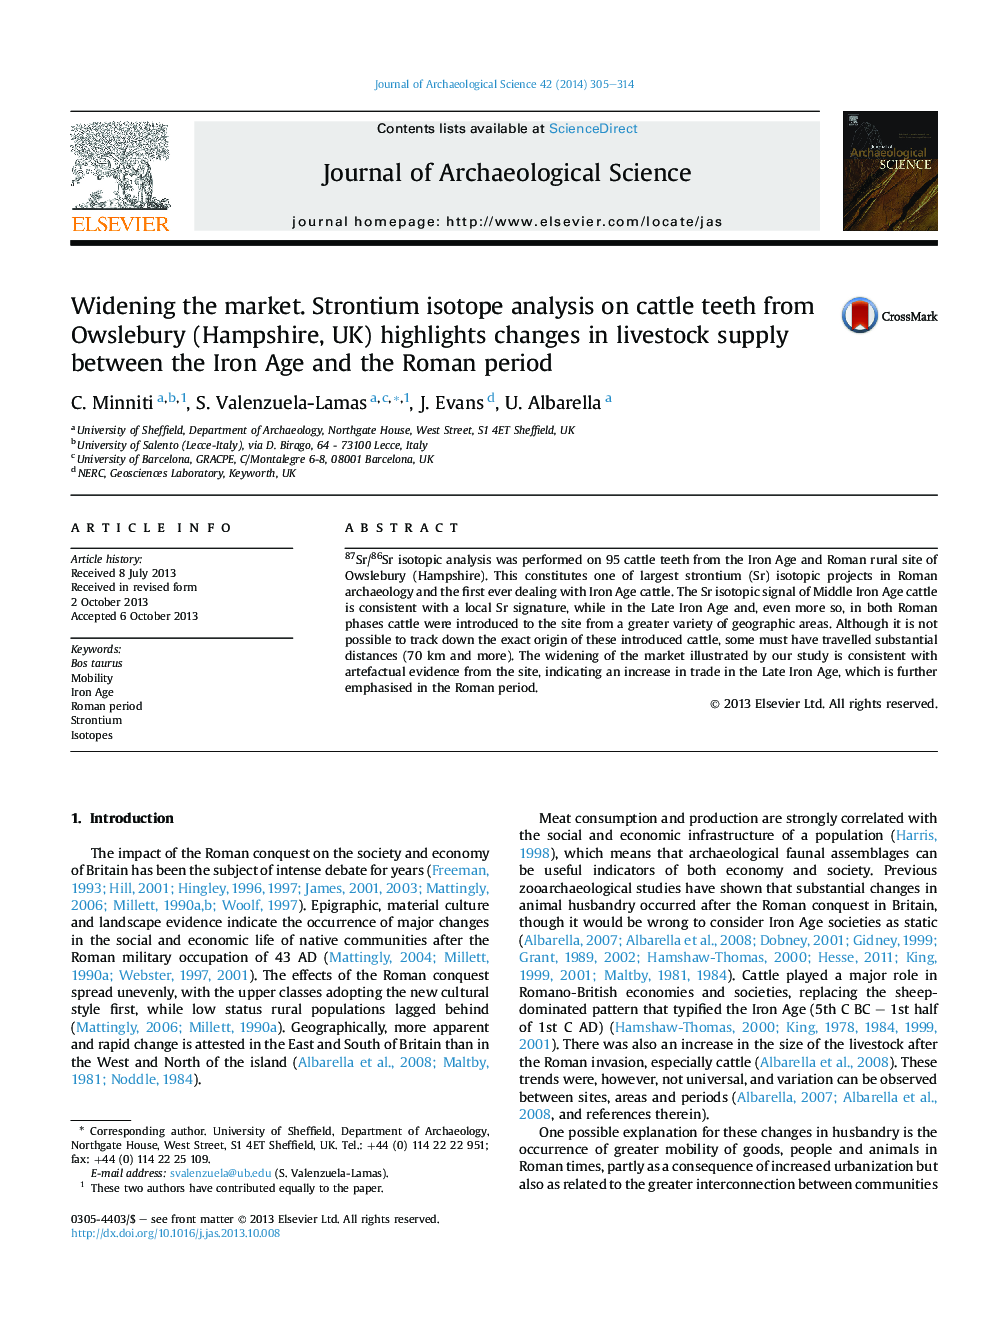 Widening the market. Strontium isotope analysis on cattle teeth from Owslebury (Hampshire, UK) highlights changes in livestock supply between the Iron Age and the Roman period